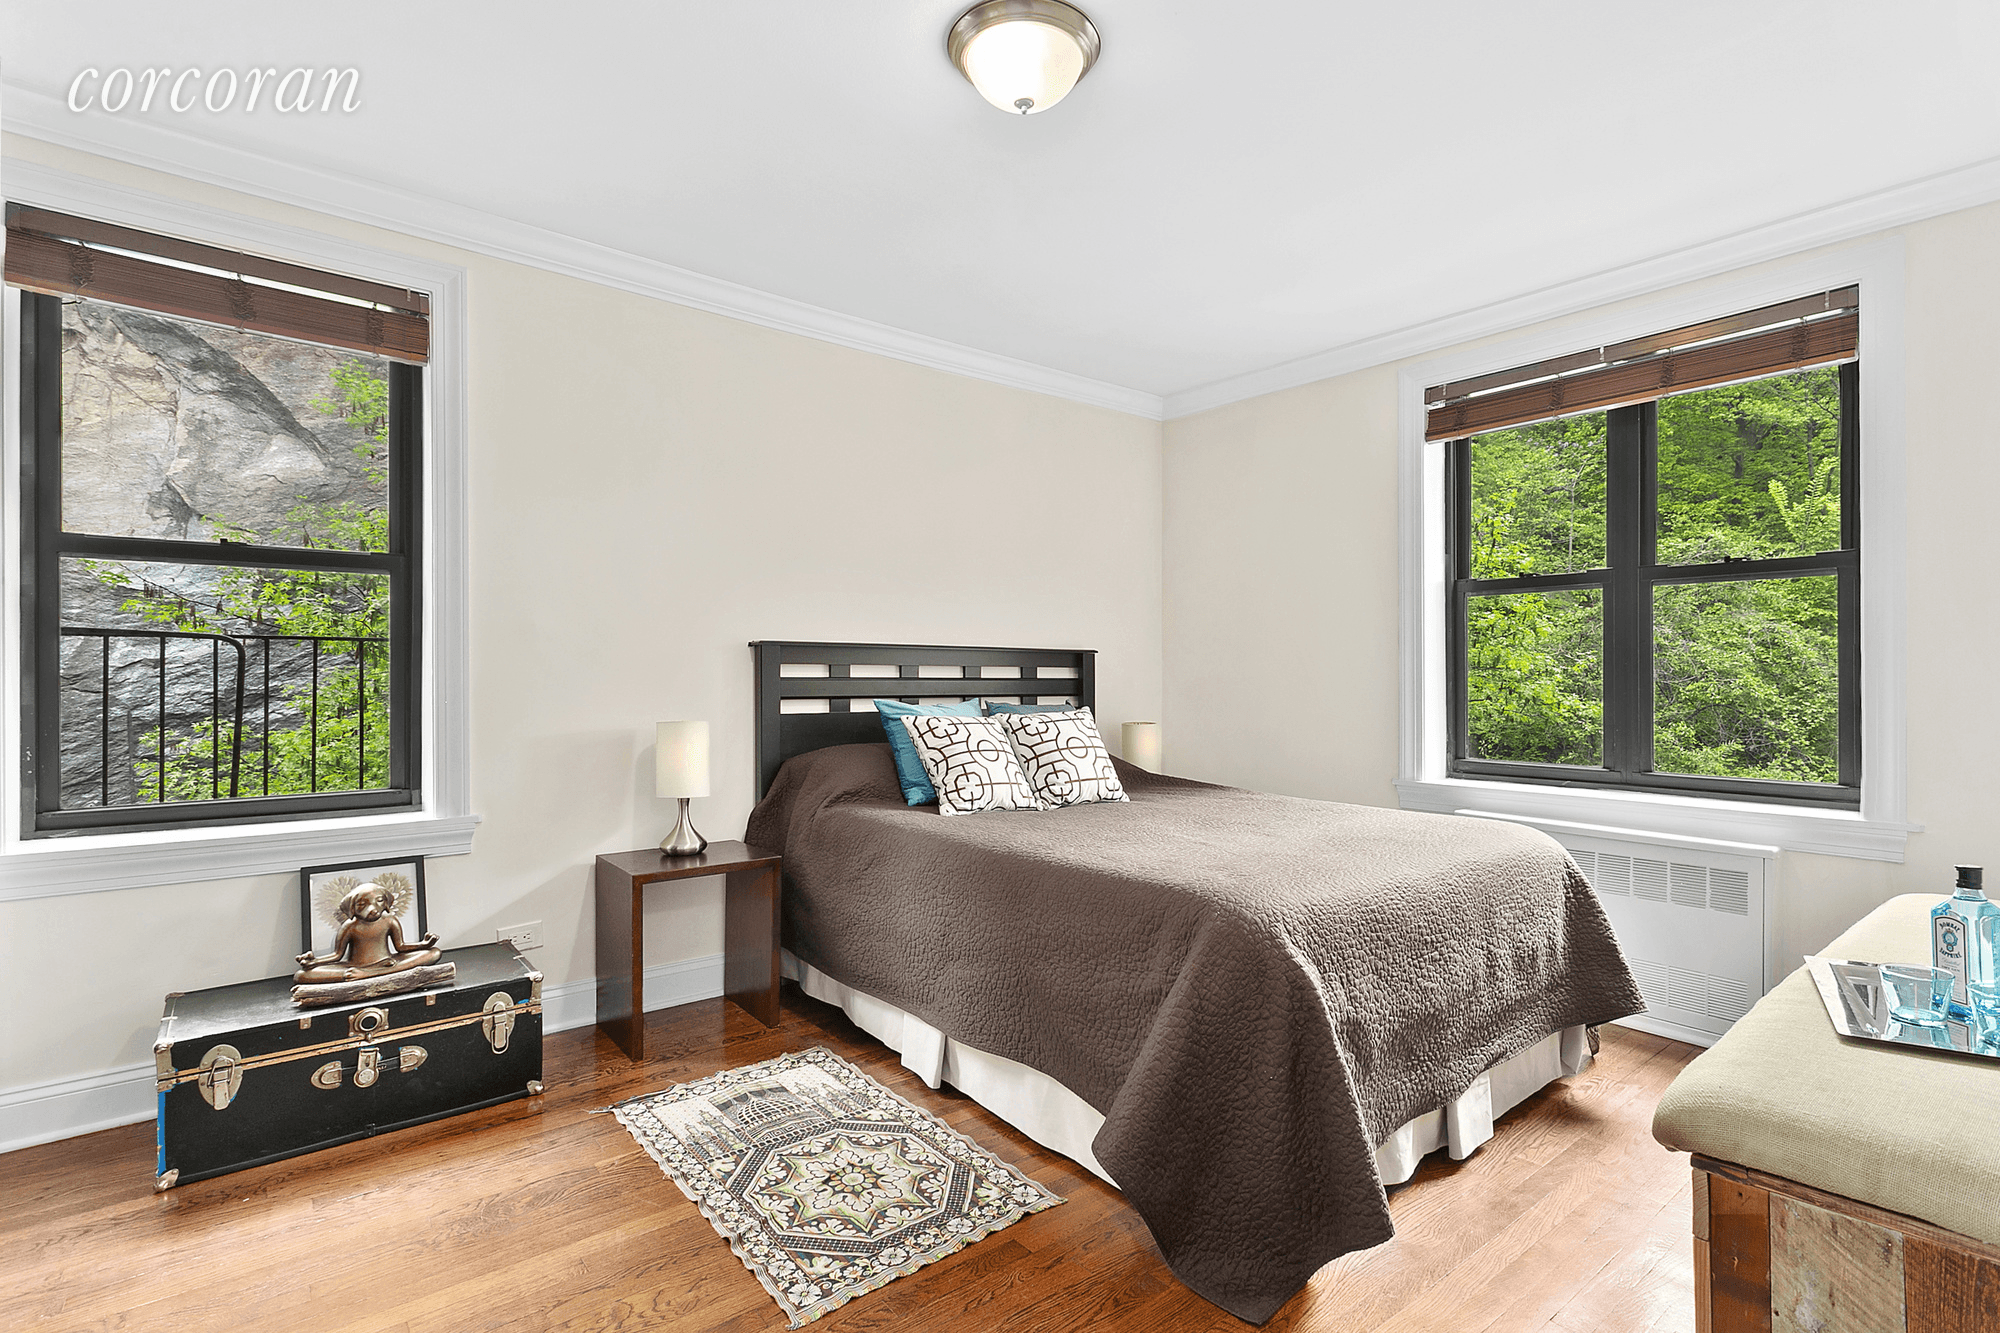 ABSOLUTE PRIVACY FACING AMAZING BENNETT AVE CLIFF amp ; FORT TRYON PARK Located on the Bennett Ave, cozy tree lined side street away from Broadway where the beautifully preserved big ...